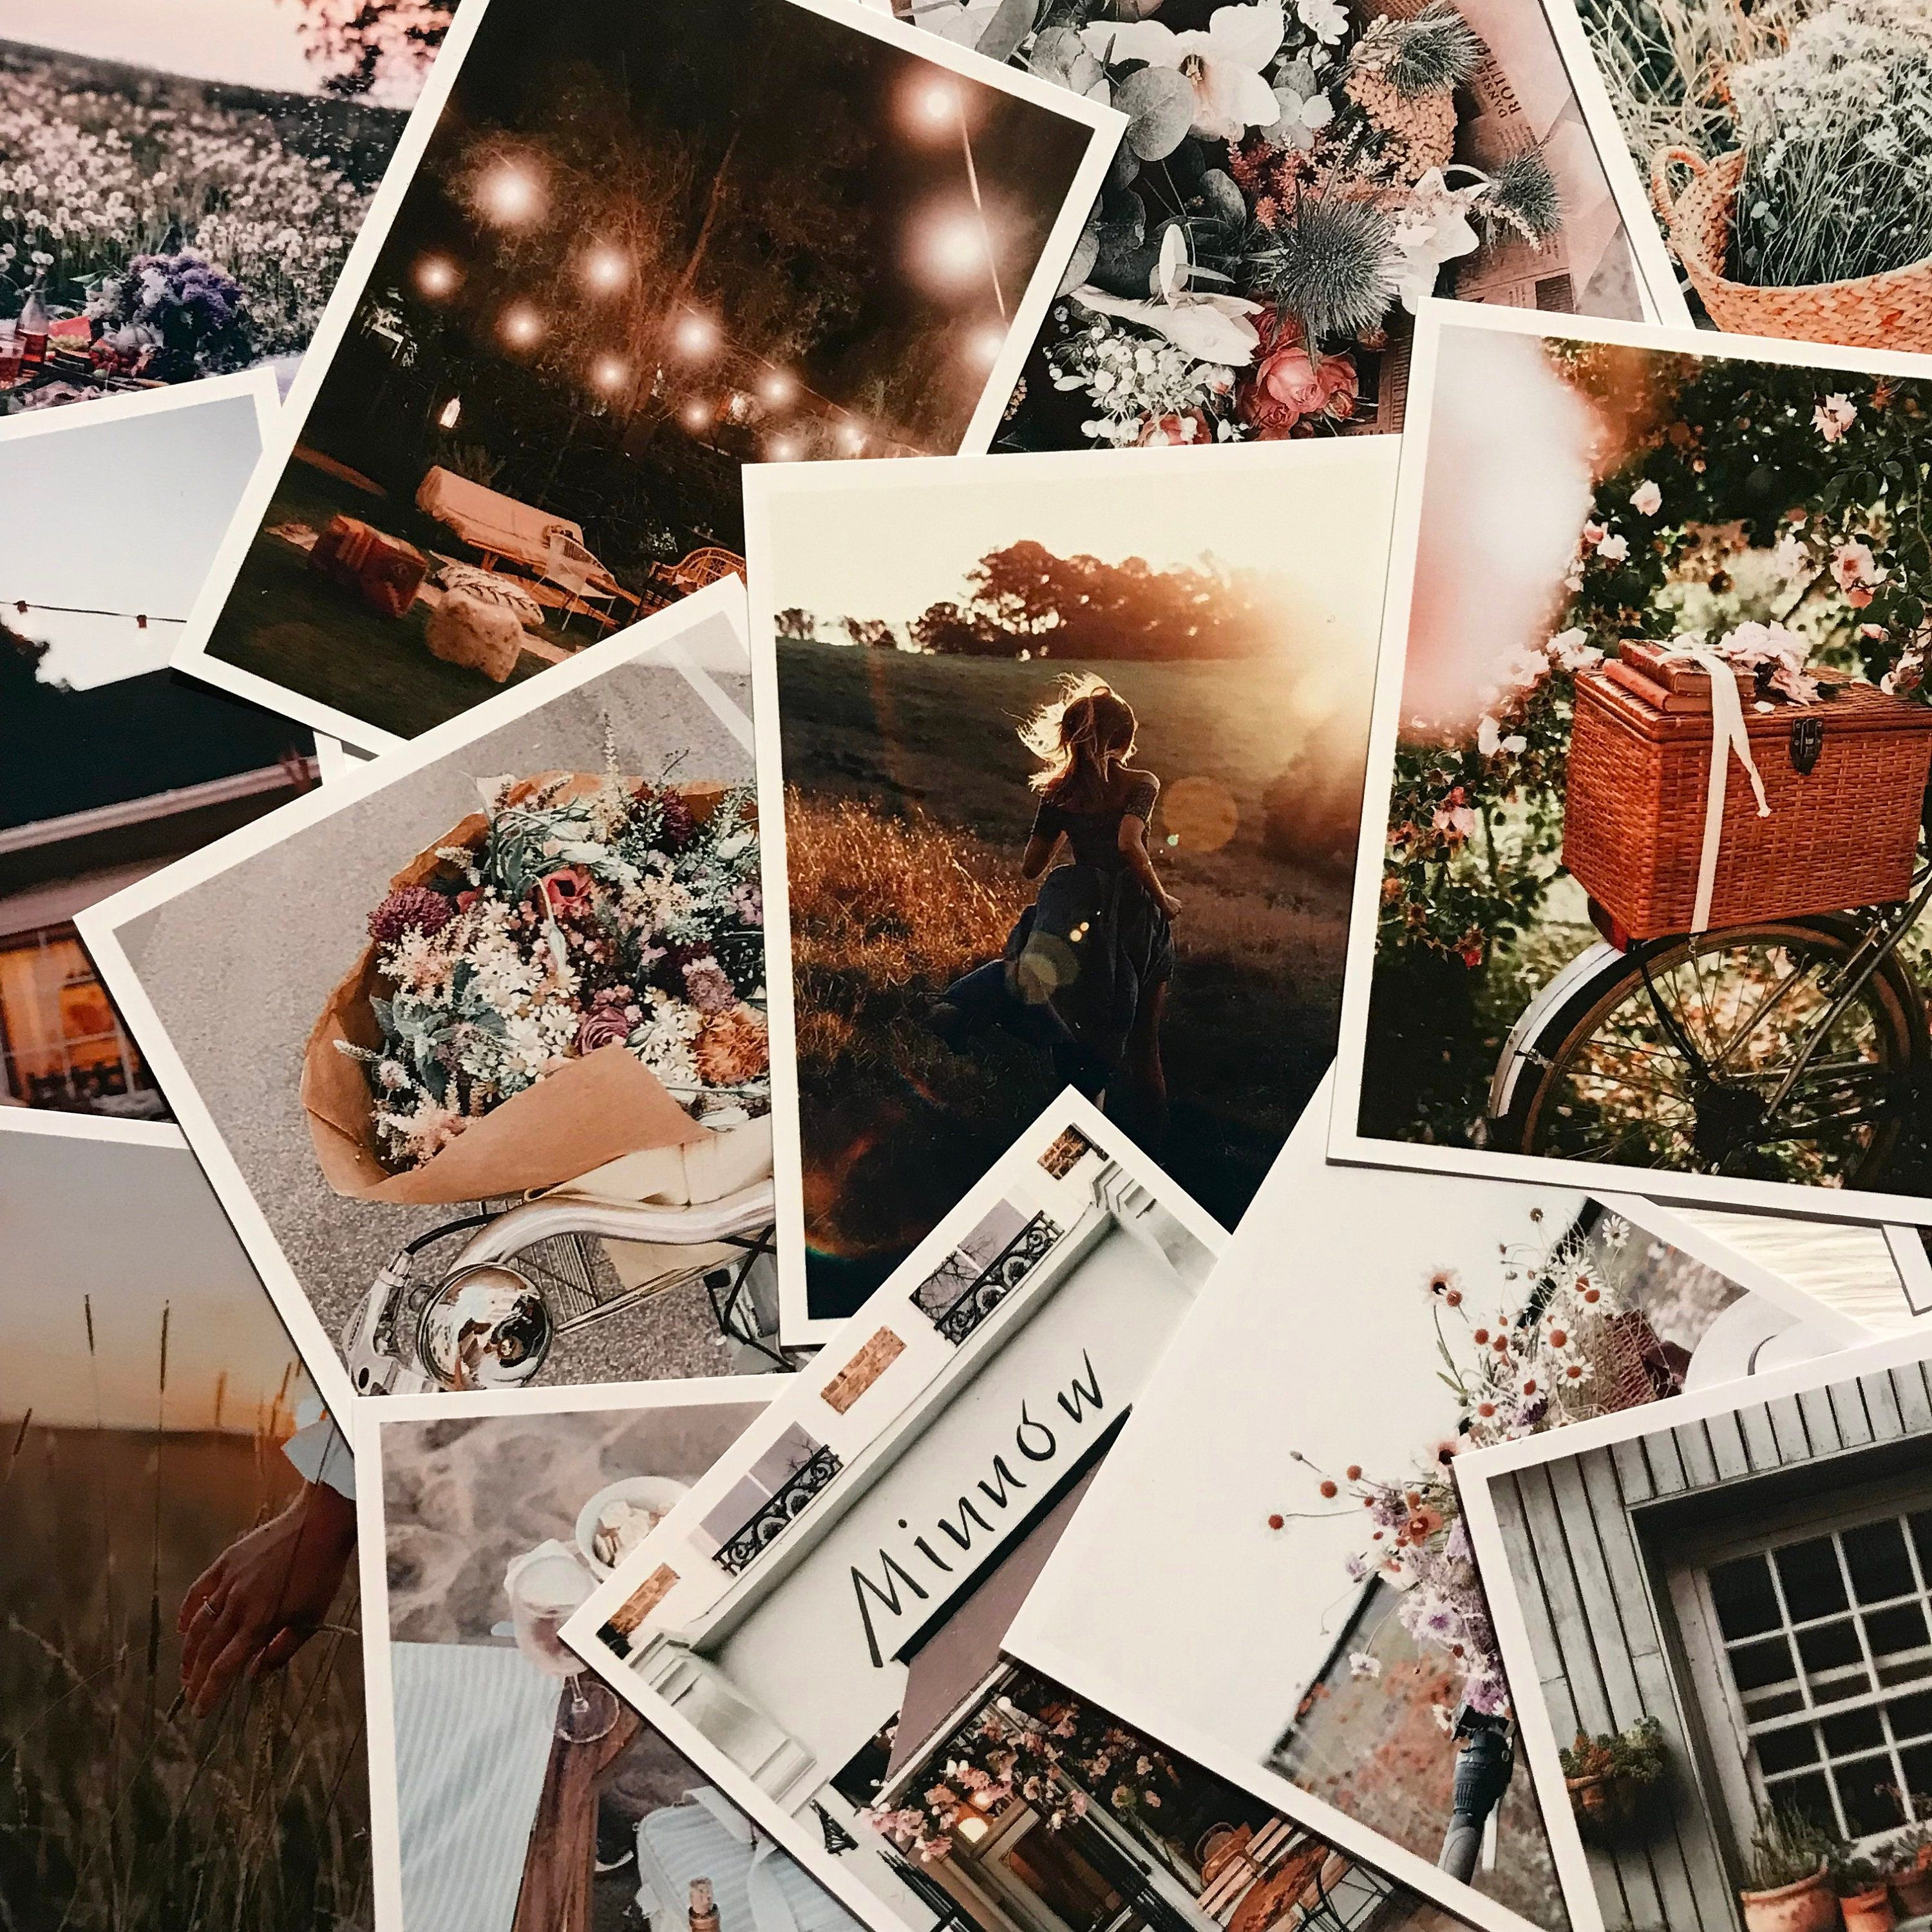 A collection of photographs on the table - Polaroid